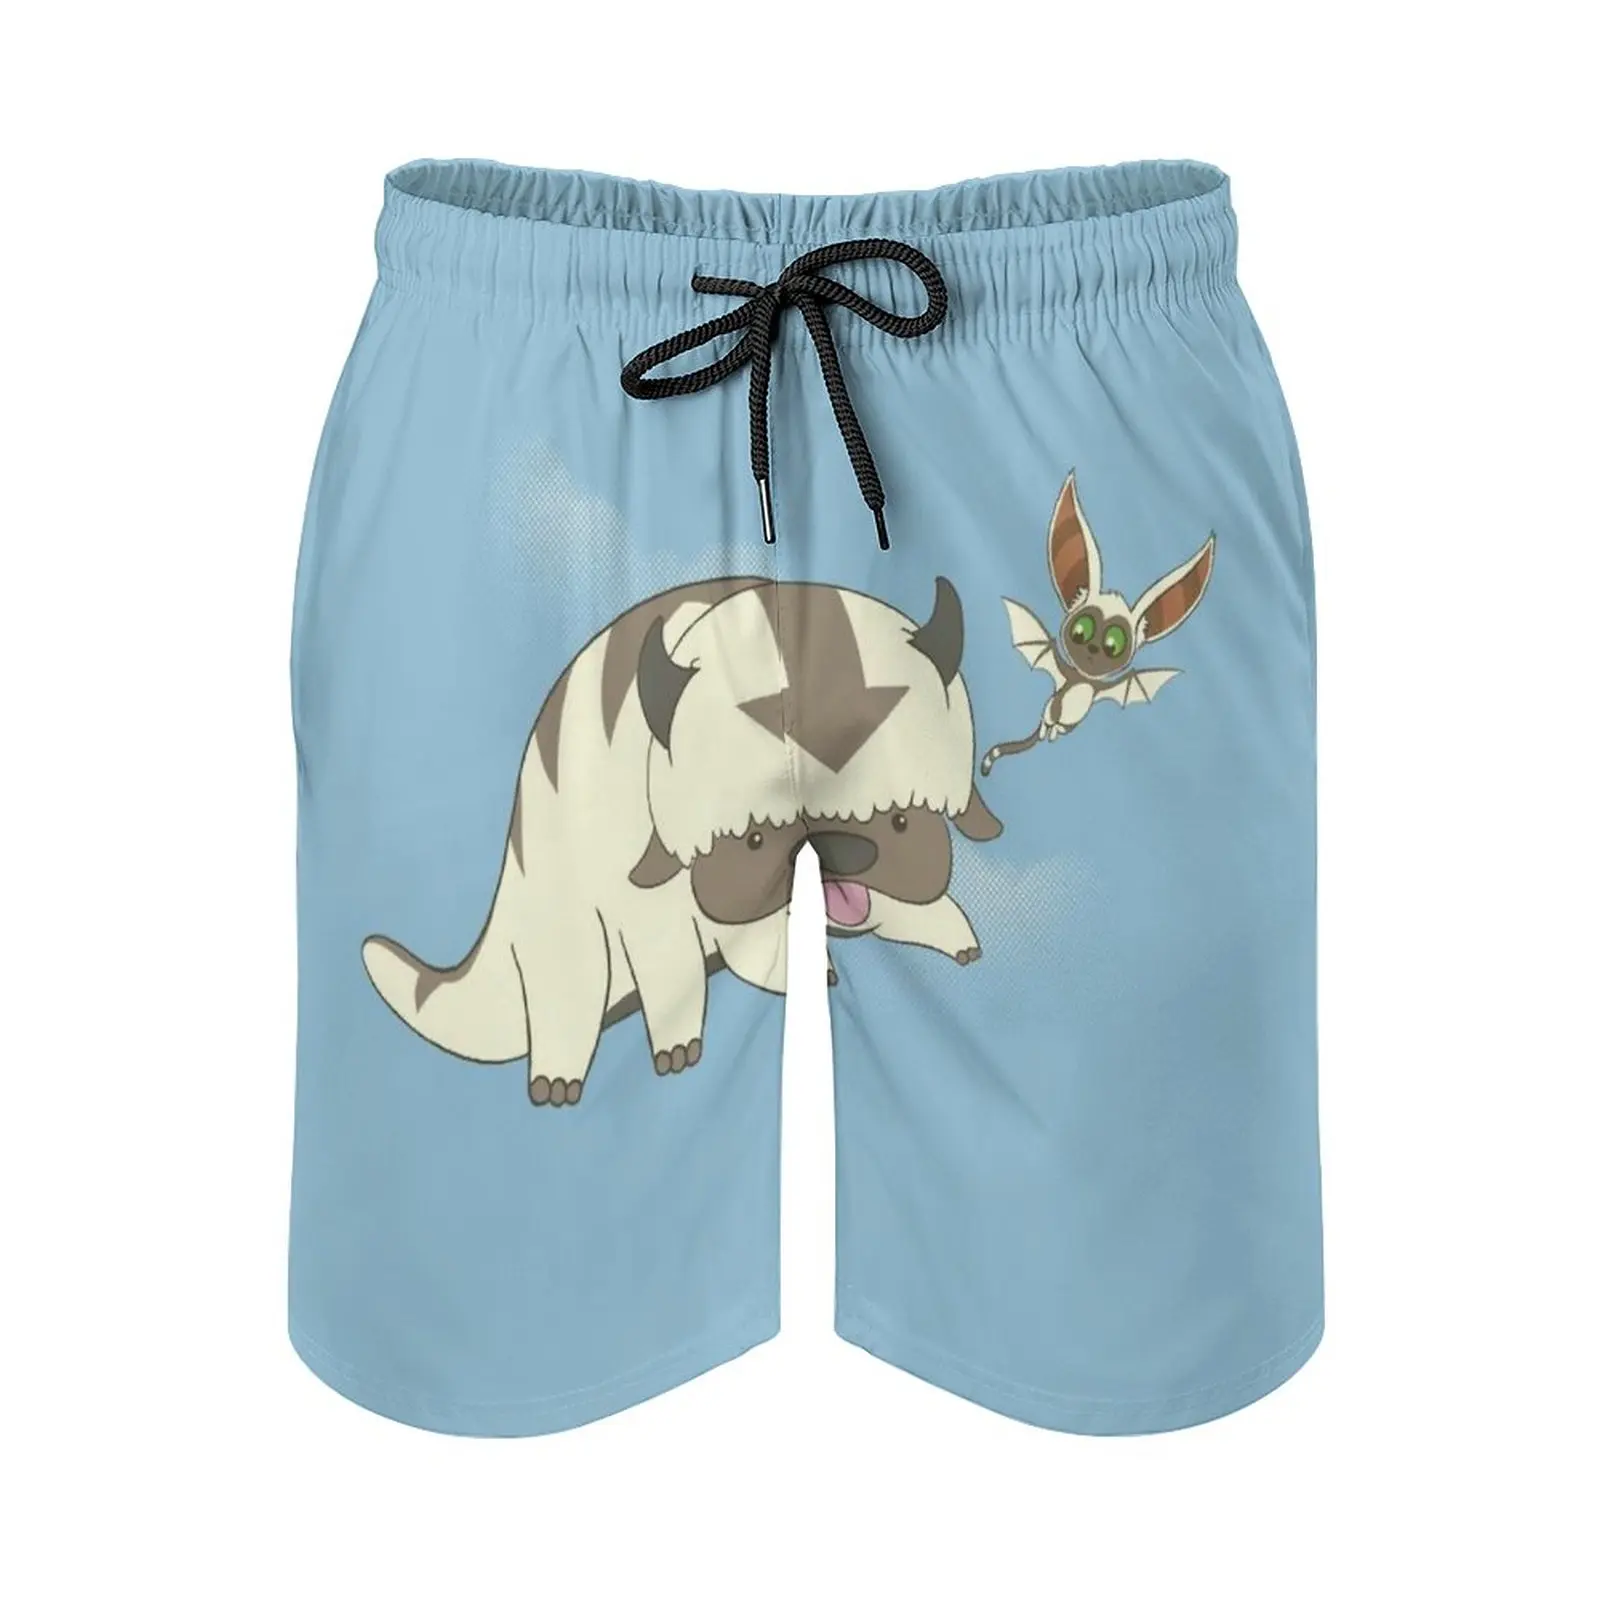 

Flying Buddies Men'S Beach Shorts Swim Trunks With Pockets Mesh Lining Surfing The Last Airbender Legend Aang Appa Momo Water